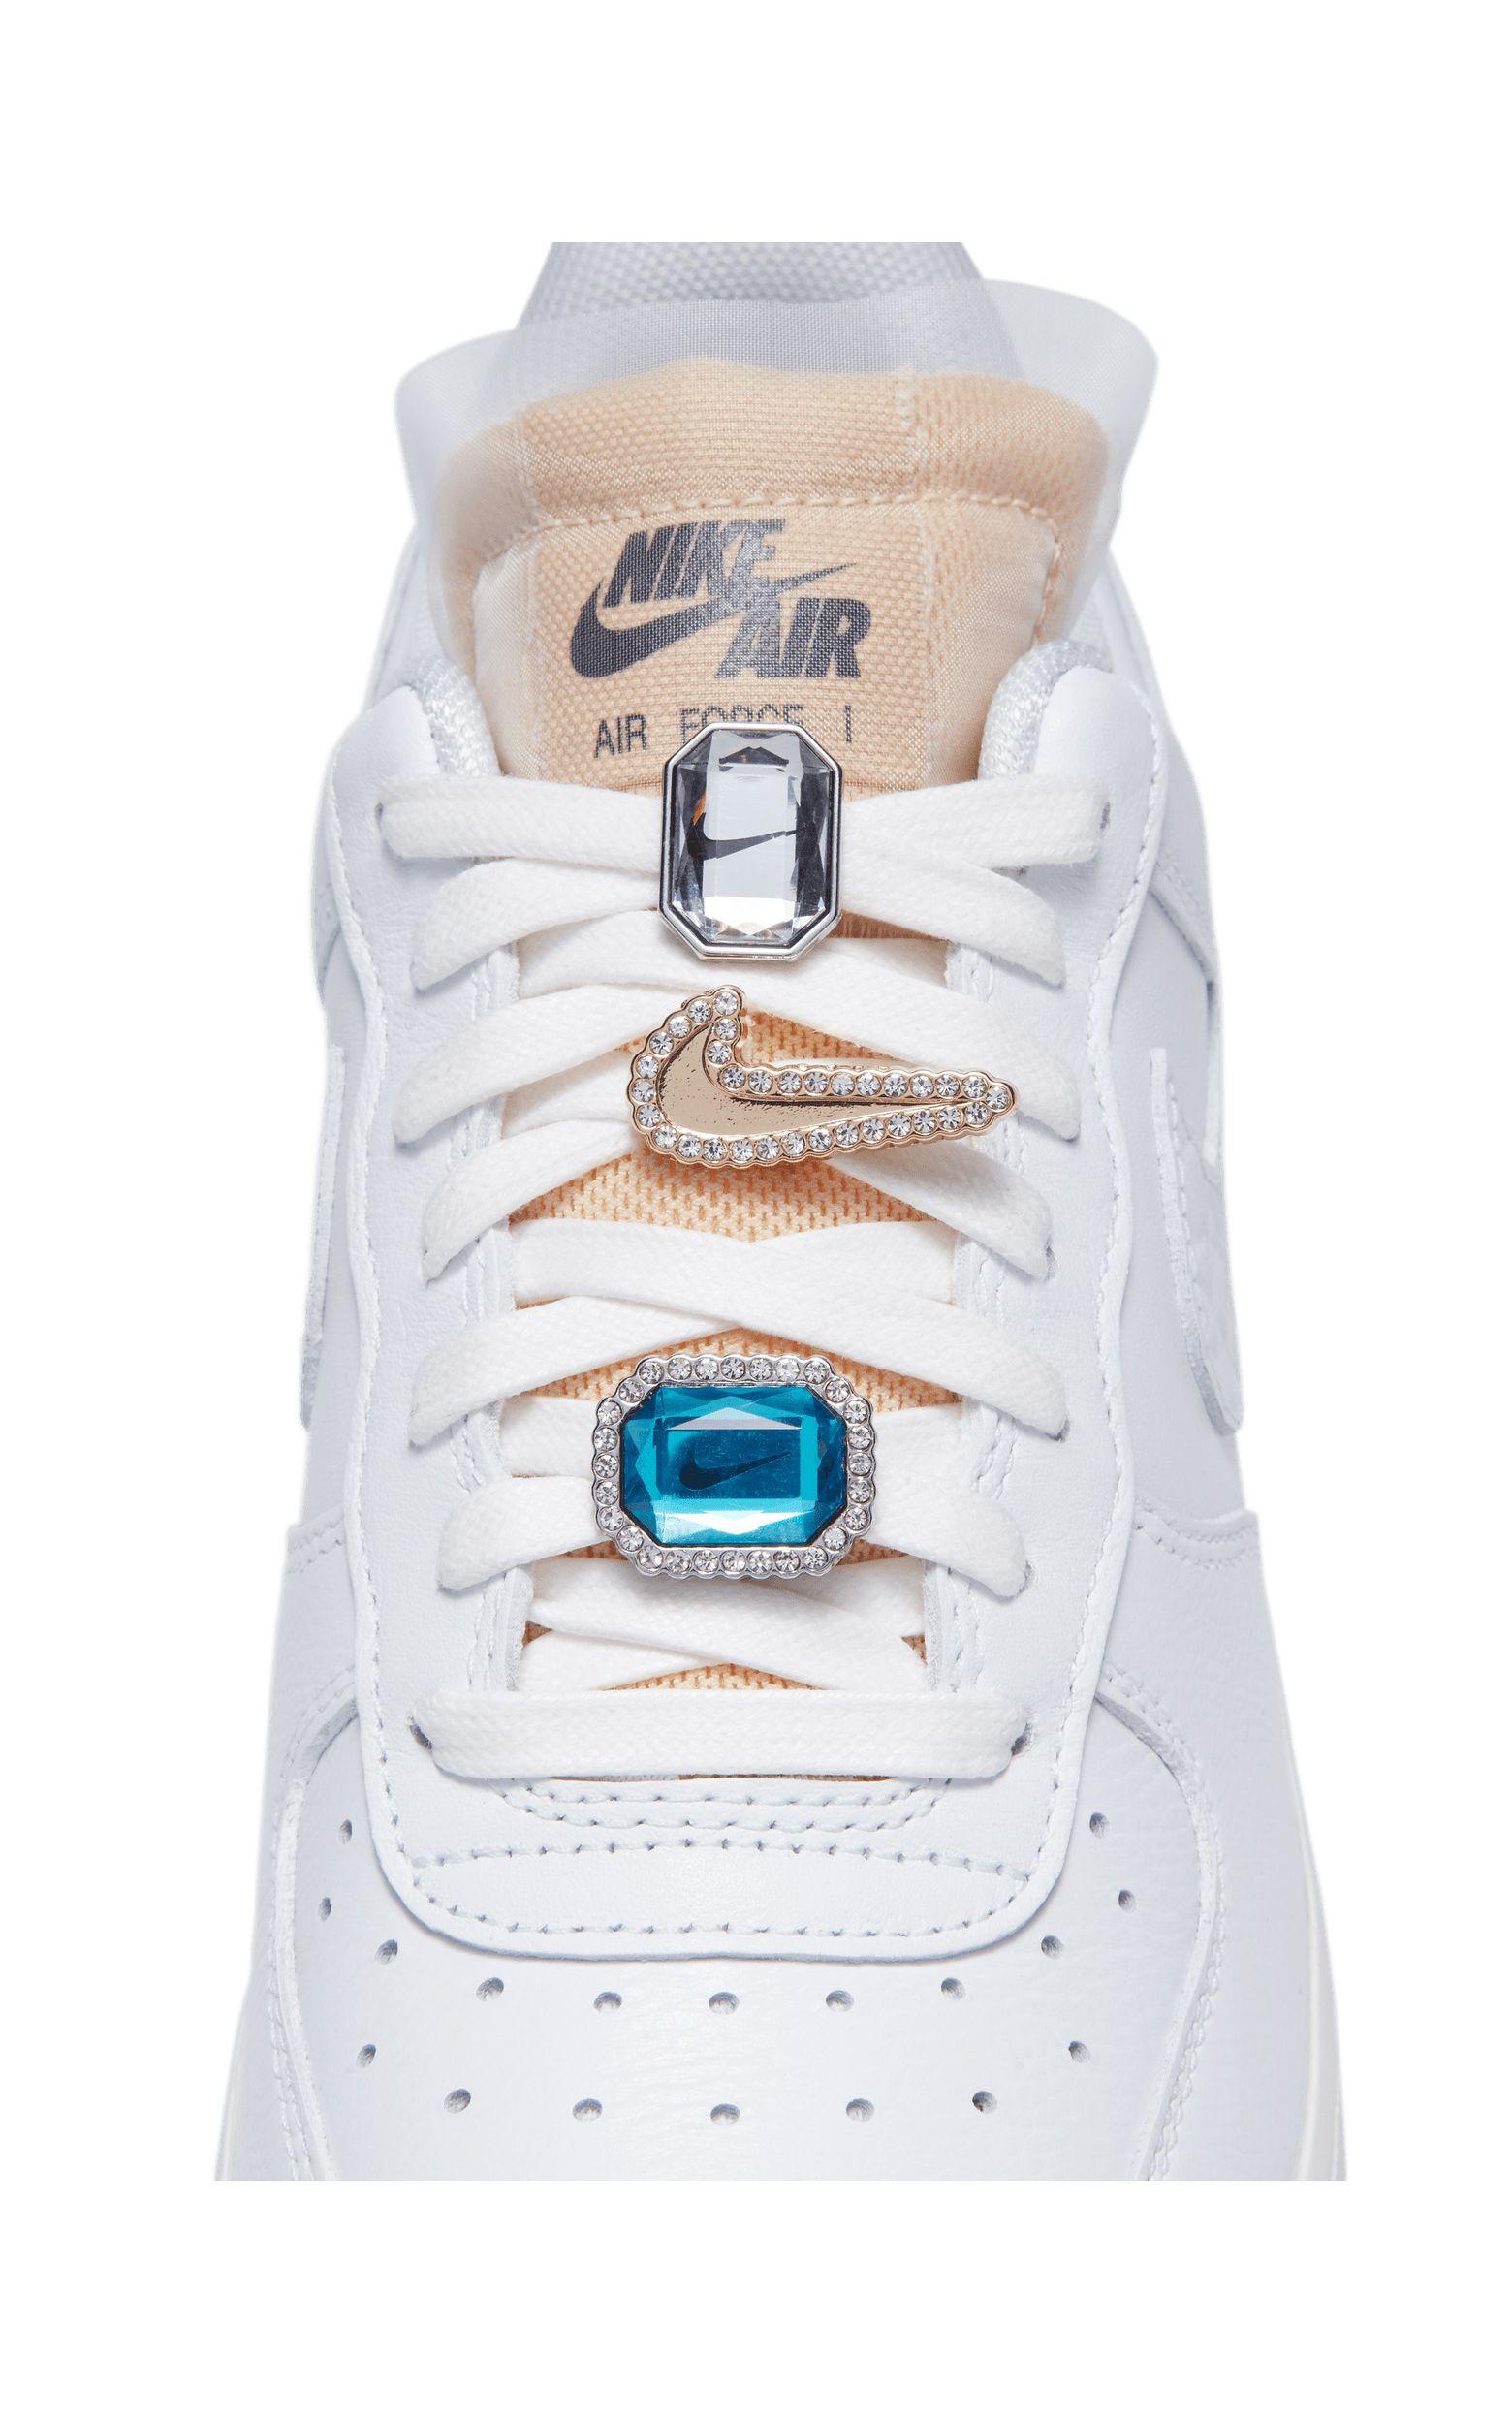 Nike Air Force 1 '07 40th Anniversary Sneakers in White | Lyst